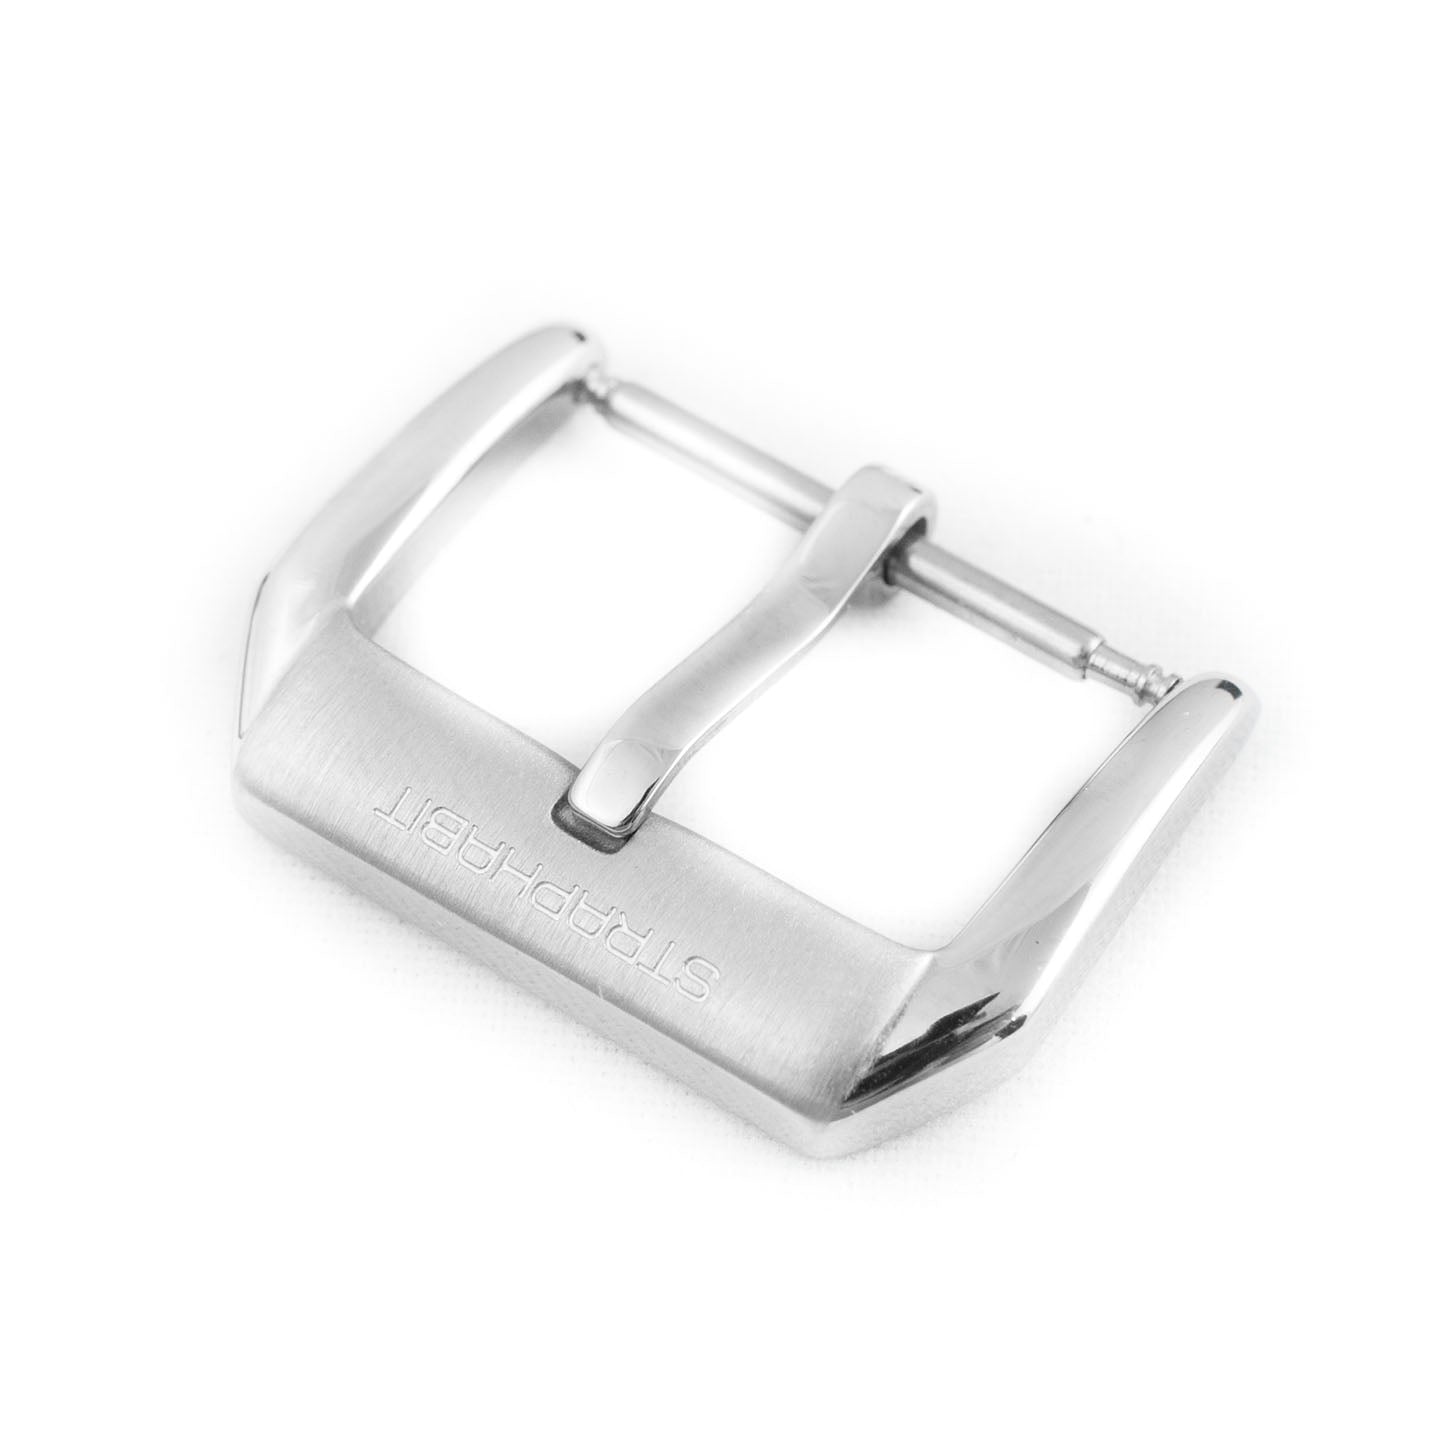 Additional Steel Watch Buckles